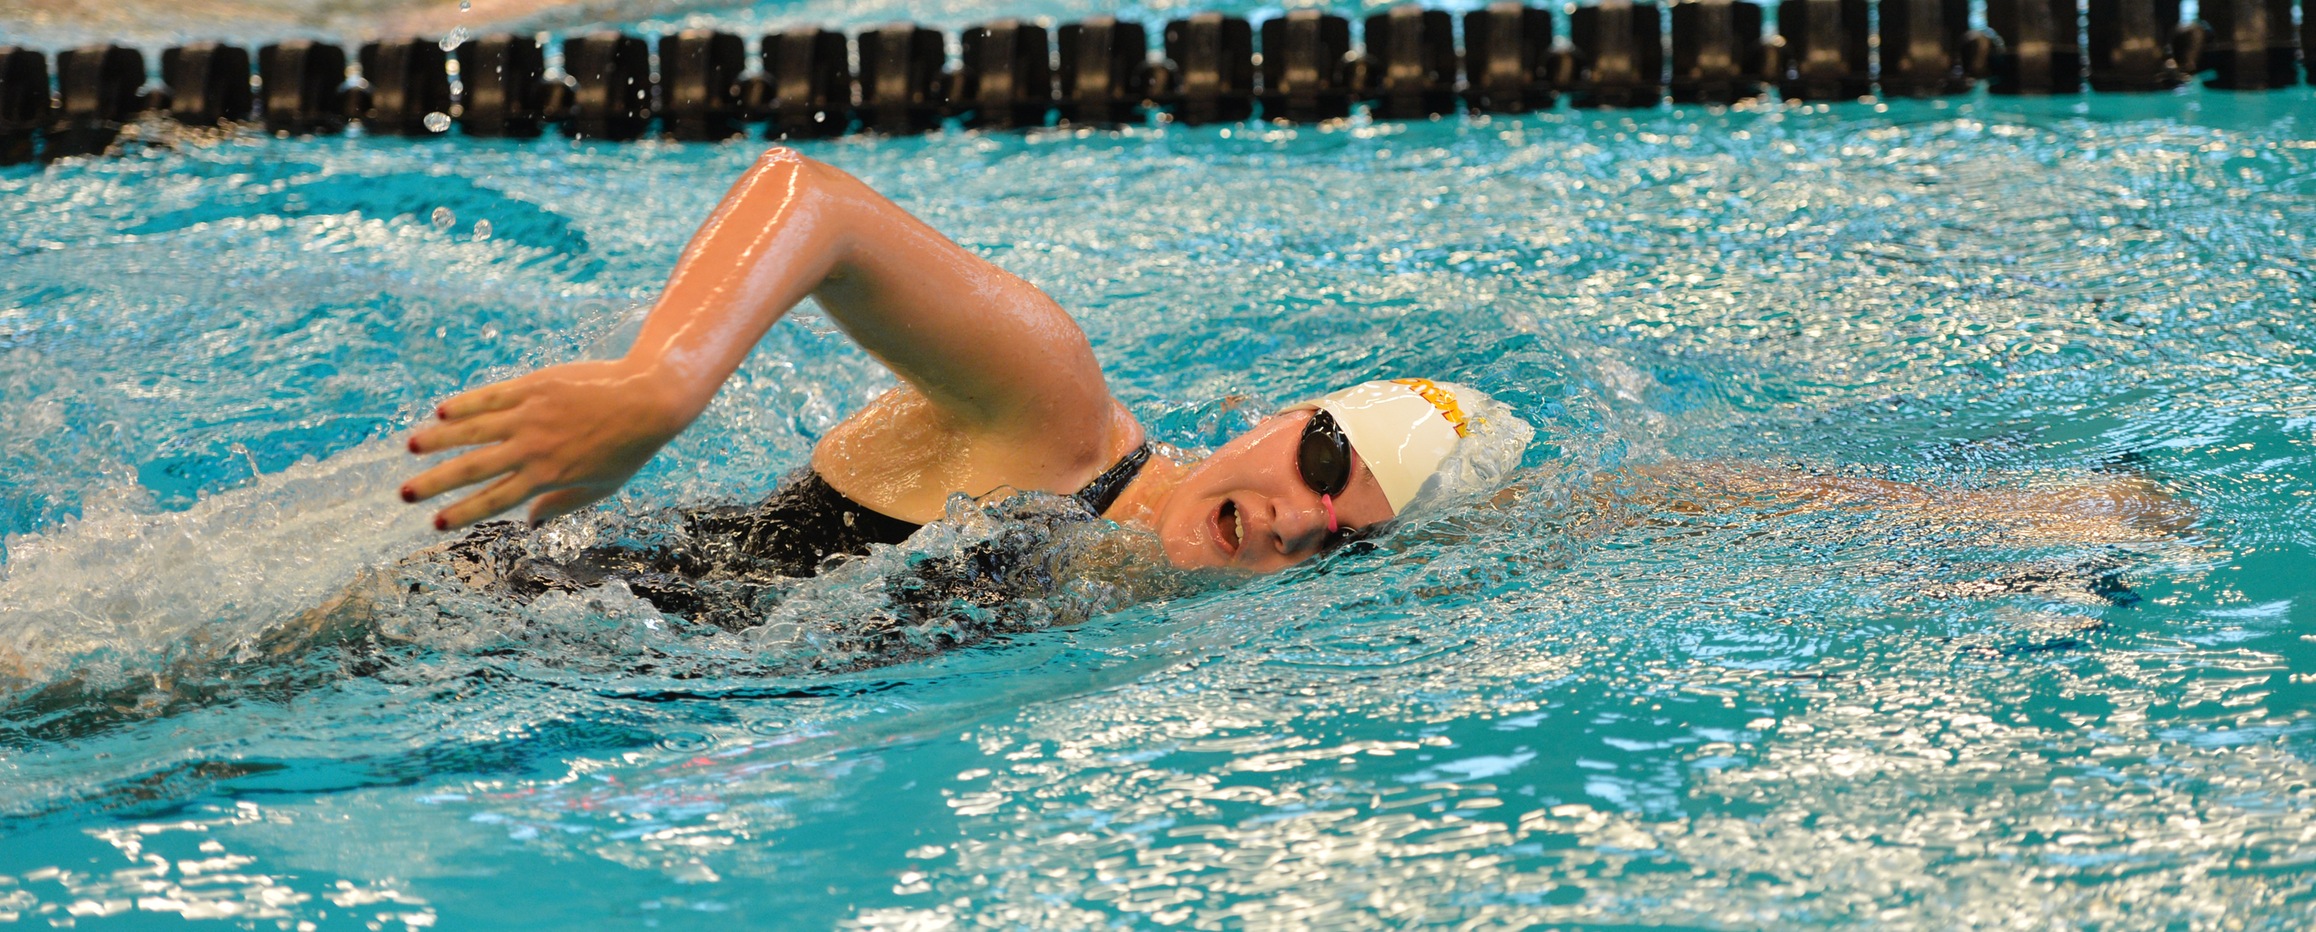 Storm swimmers break 18 school records at Liberal Arts Championships to finish season